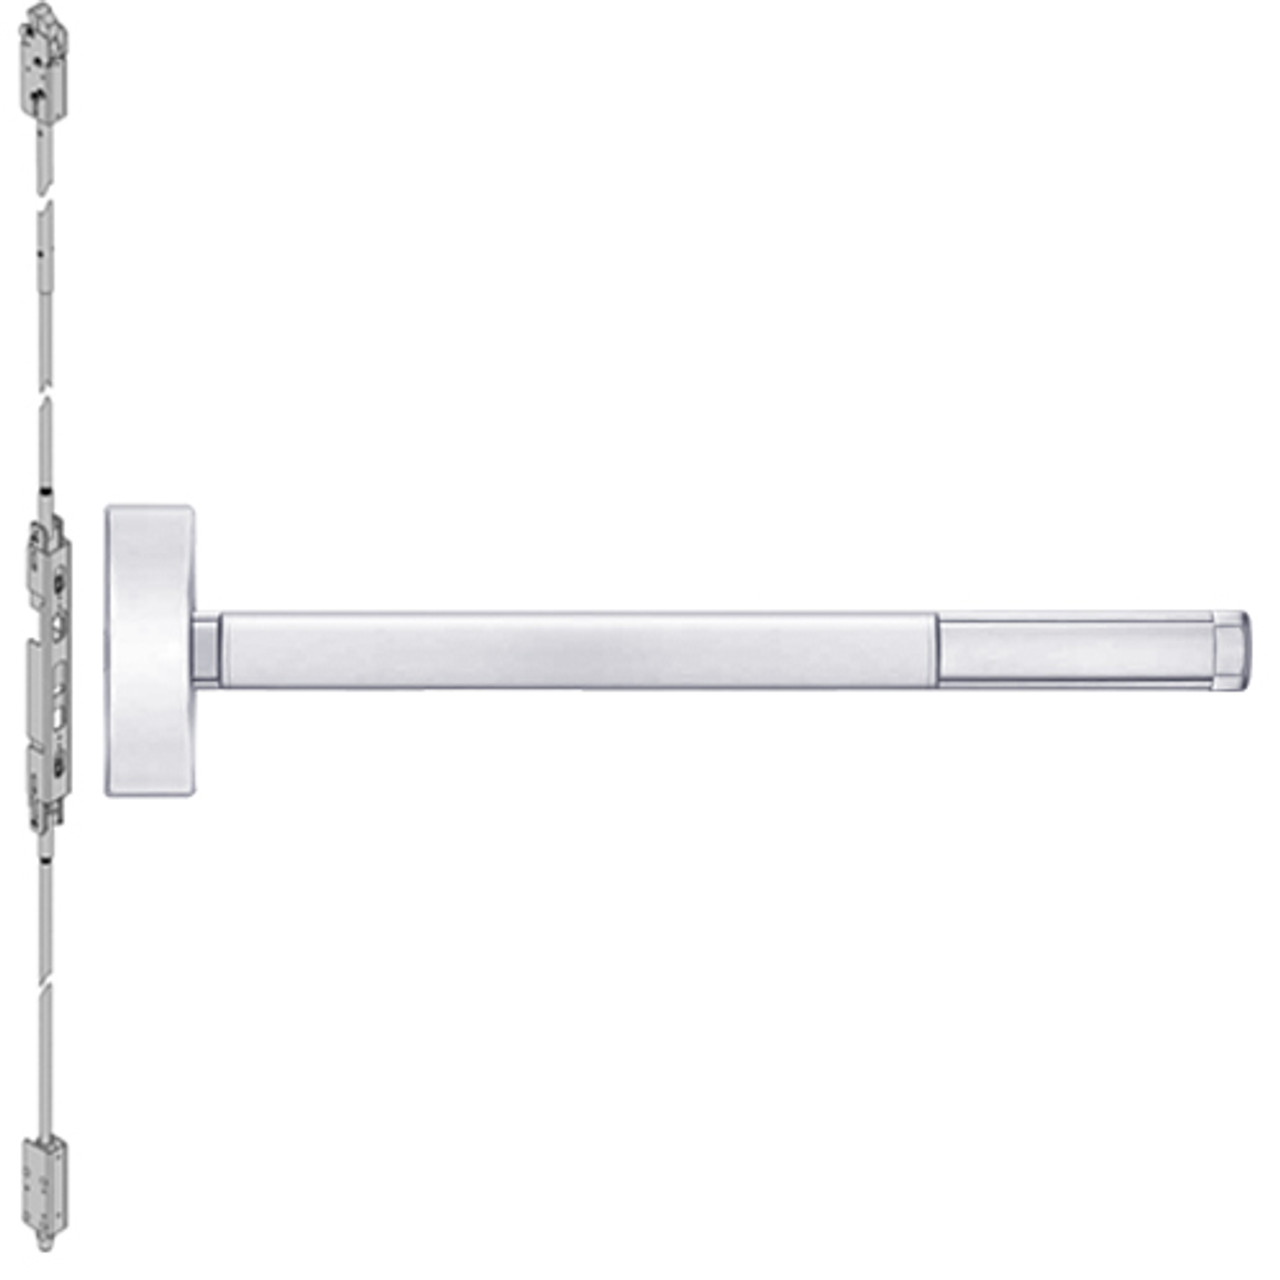 2814LBR-625-48 PHI 2800 Series Non Fire Rated Concealed Vertical Rod Exit Device Prepped for Lever-Knob Always Active in Bright Chrome Finish